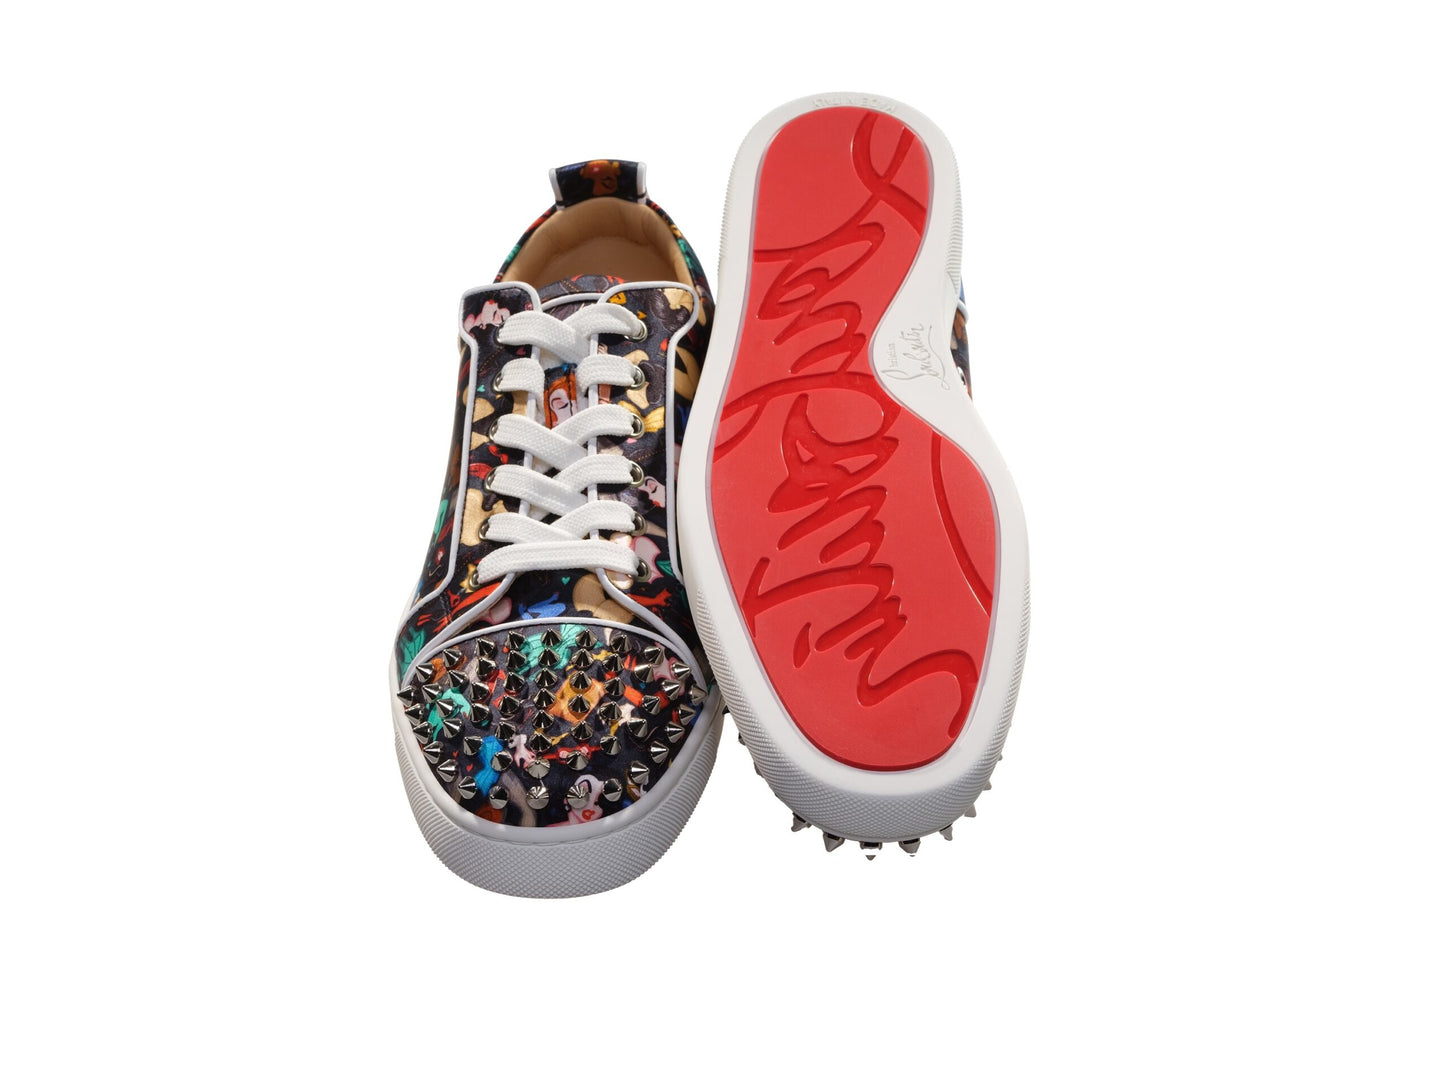 Christian Louboutin Louis Junior Spikes Orlato Crepe Satin Multicolour Limited Edition Dr Bored Print Sneakers